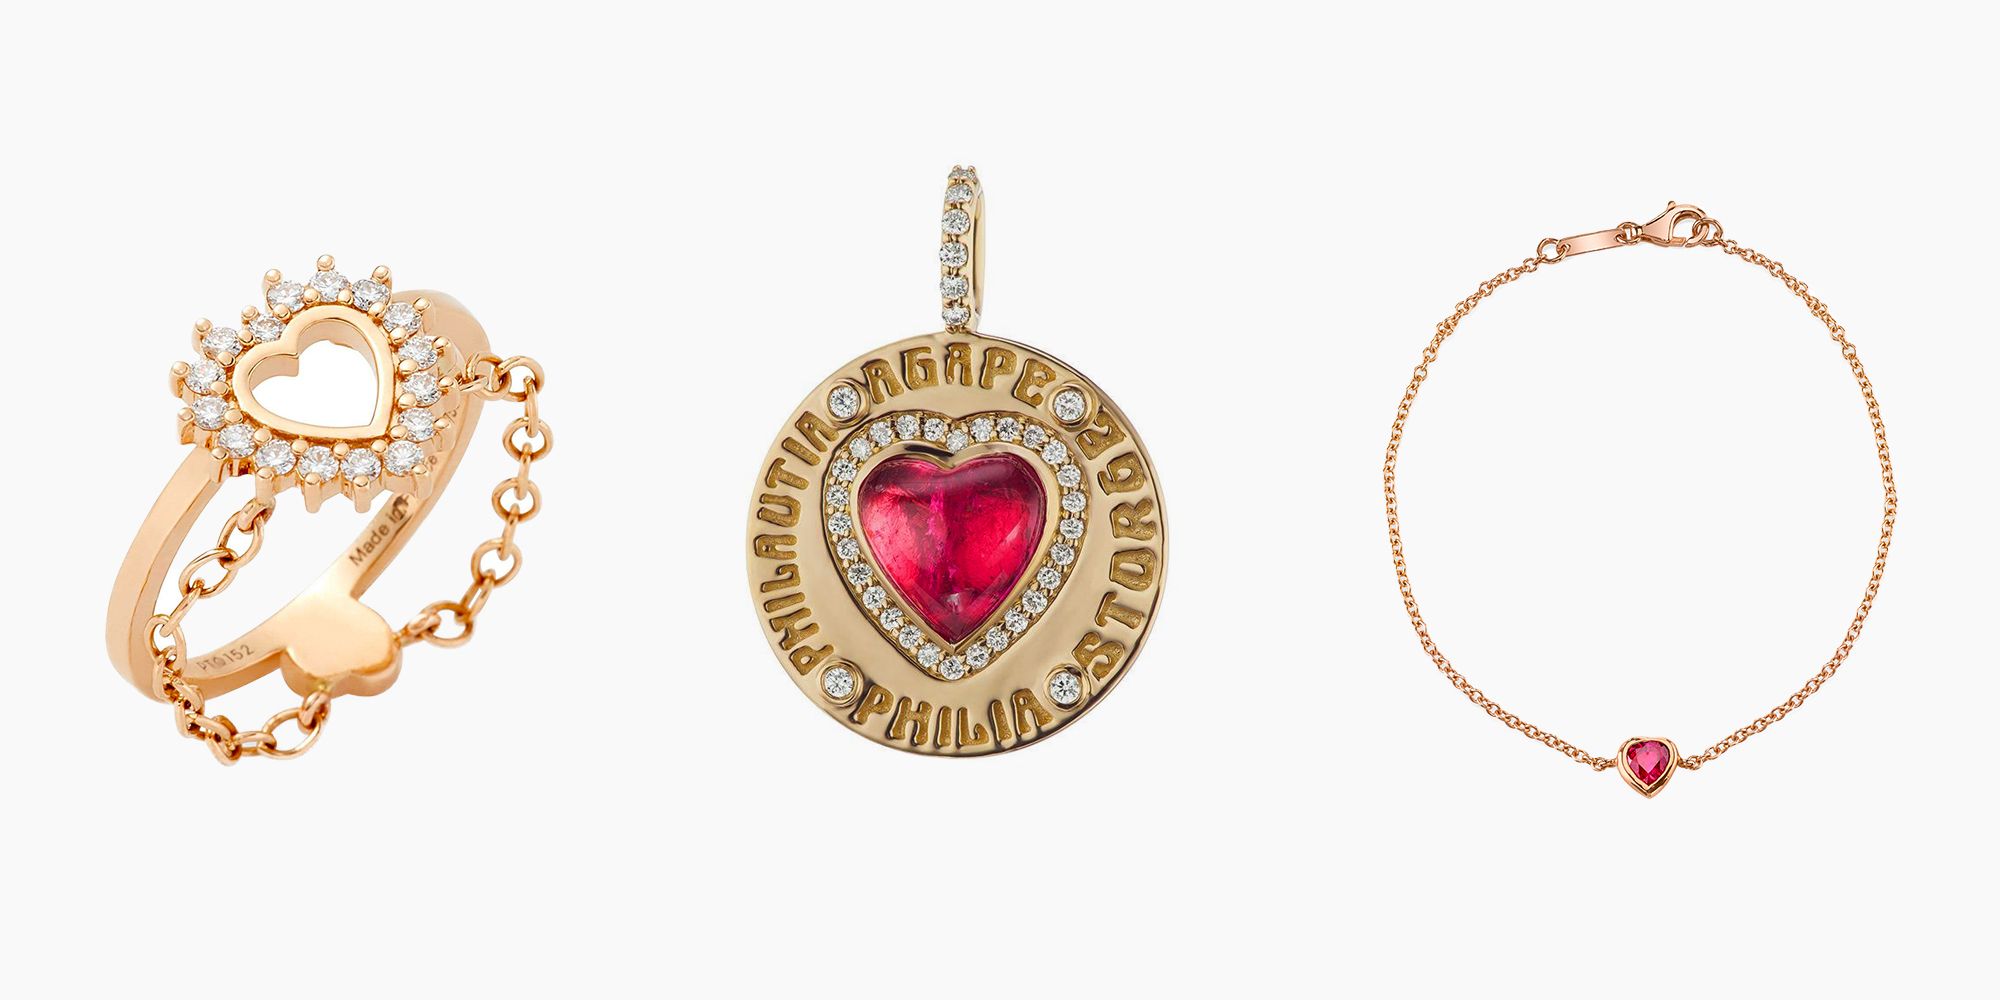 All Fine Jewellery - Jewellery Luxury Collection as Valentine's Gift